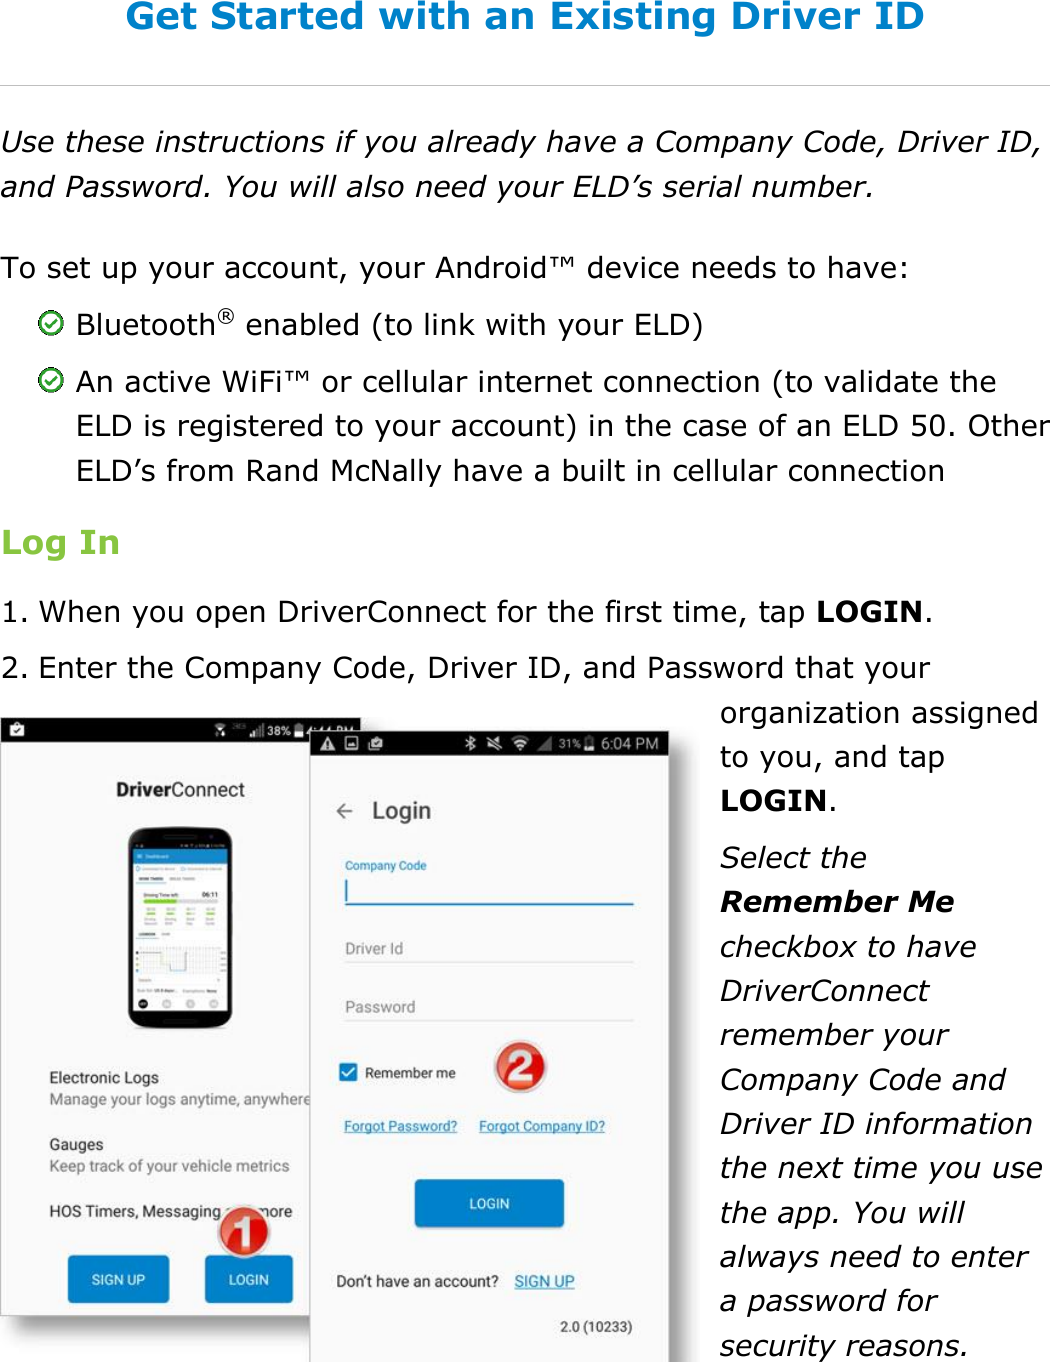 Set My Duty Status DriverConnect User Guide  15 © 2017, Rand McNally, Inc. Get Started with an Existing Driver ID Use these instructions if you already have a Company Code, Driver ID, and Password. You will also need your ELD’s serial number. To set up your account, your Android™ device needs to have:  Bluetooth® enabled (to link with your ELD)  An active WiFi™ or cellular internet connection (to validate the ELD is registered to your account) in the case of an ELD 50. Other ELD’s from Rand McNally have a built in cellular connection Log In 1. When you open DriverConnect for the first time, tap LOGIN. 2. Enter the Company Code, Driver ID, and Password that your organization assigned to you, and tap LOGIN. Select the Remember Me checkbox to have DriverConnect remember your Company Code and Driver ID information the next time you use the app. You will always need to enter a password for security reasons.    